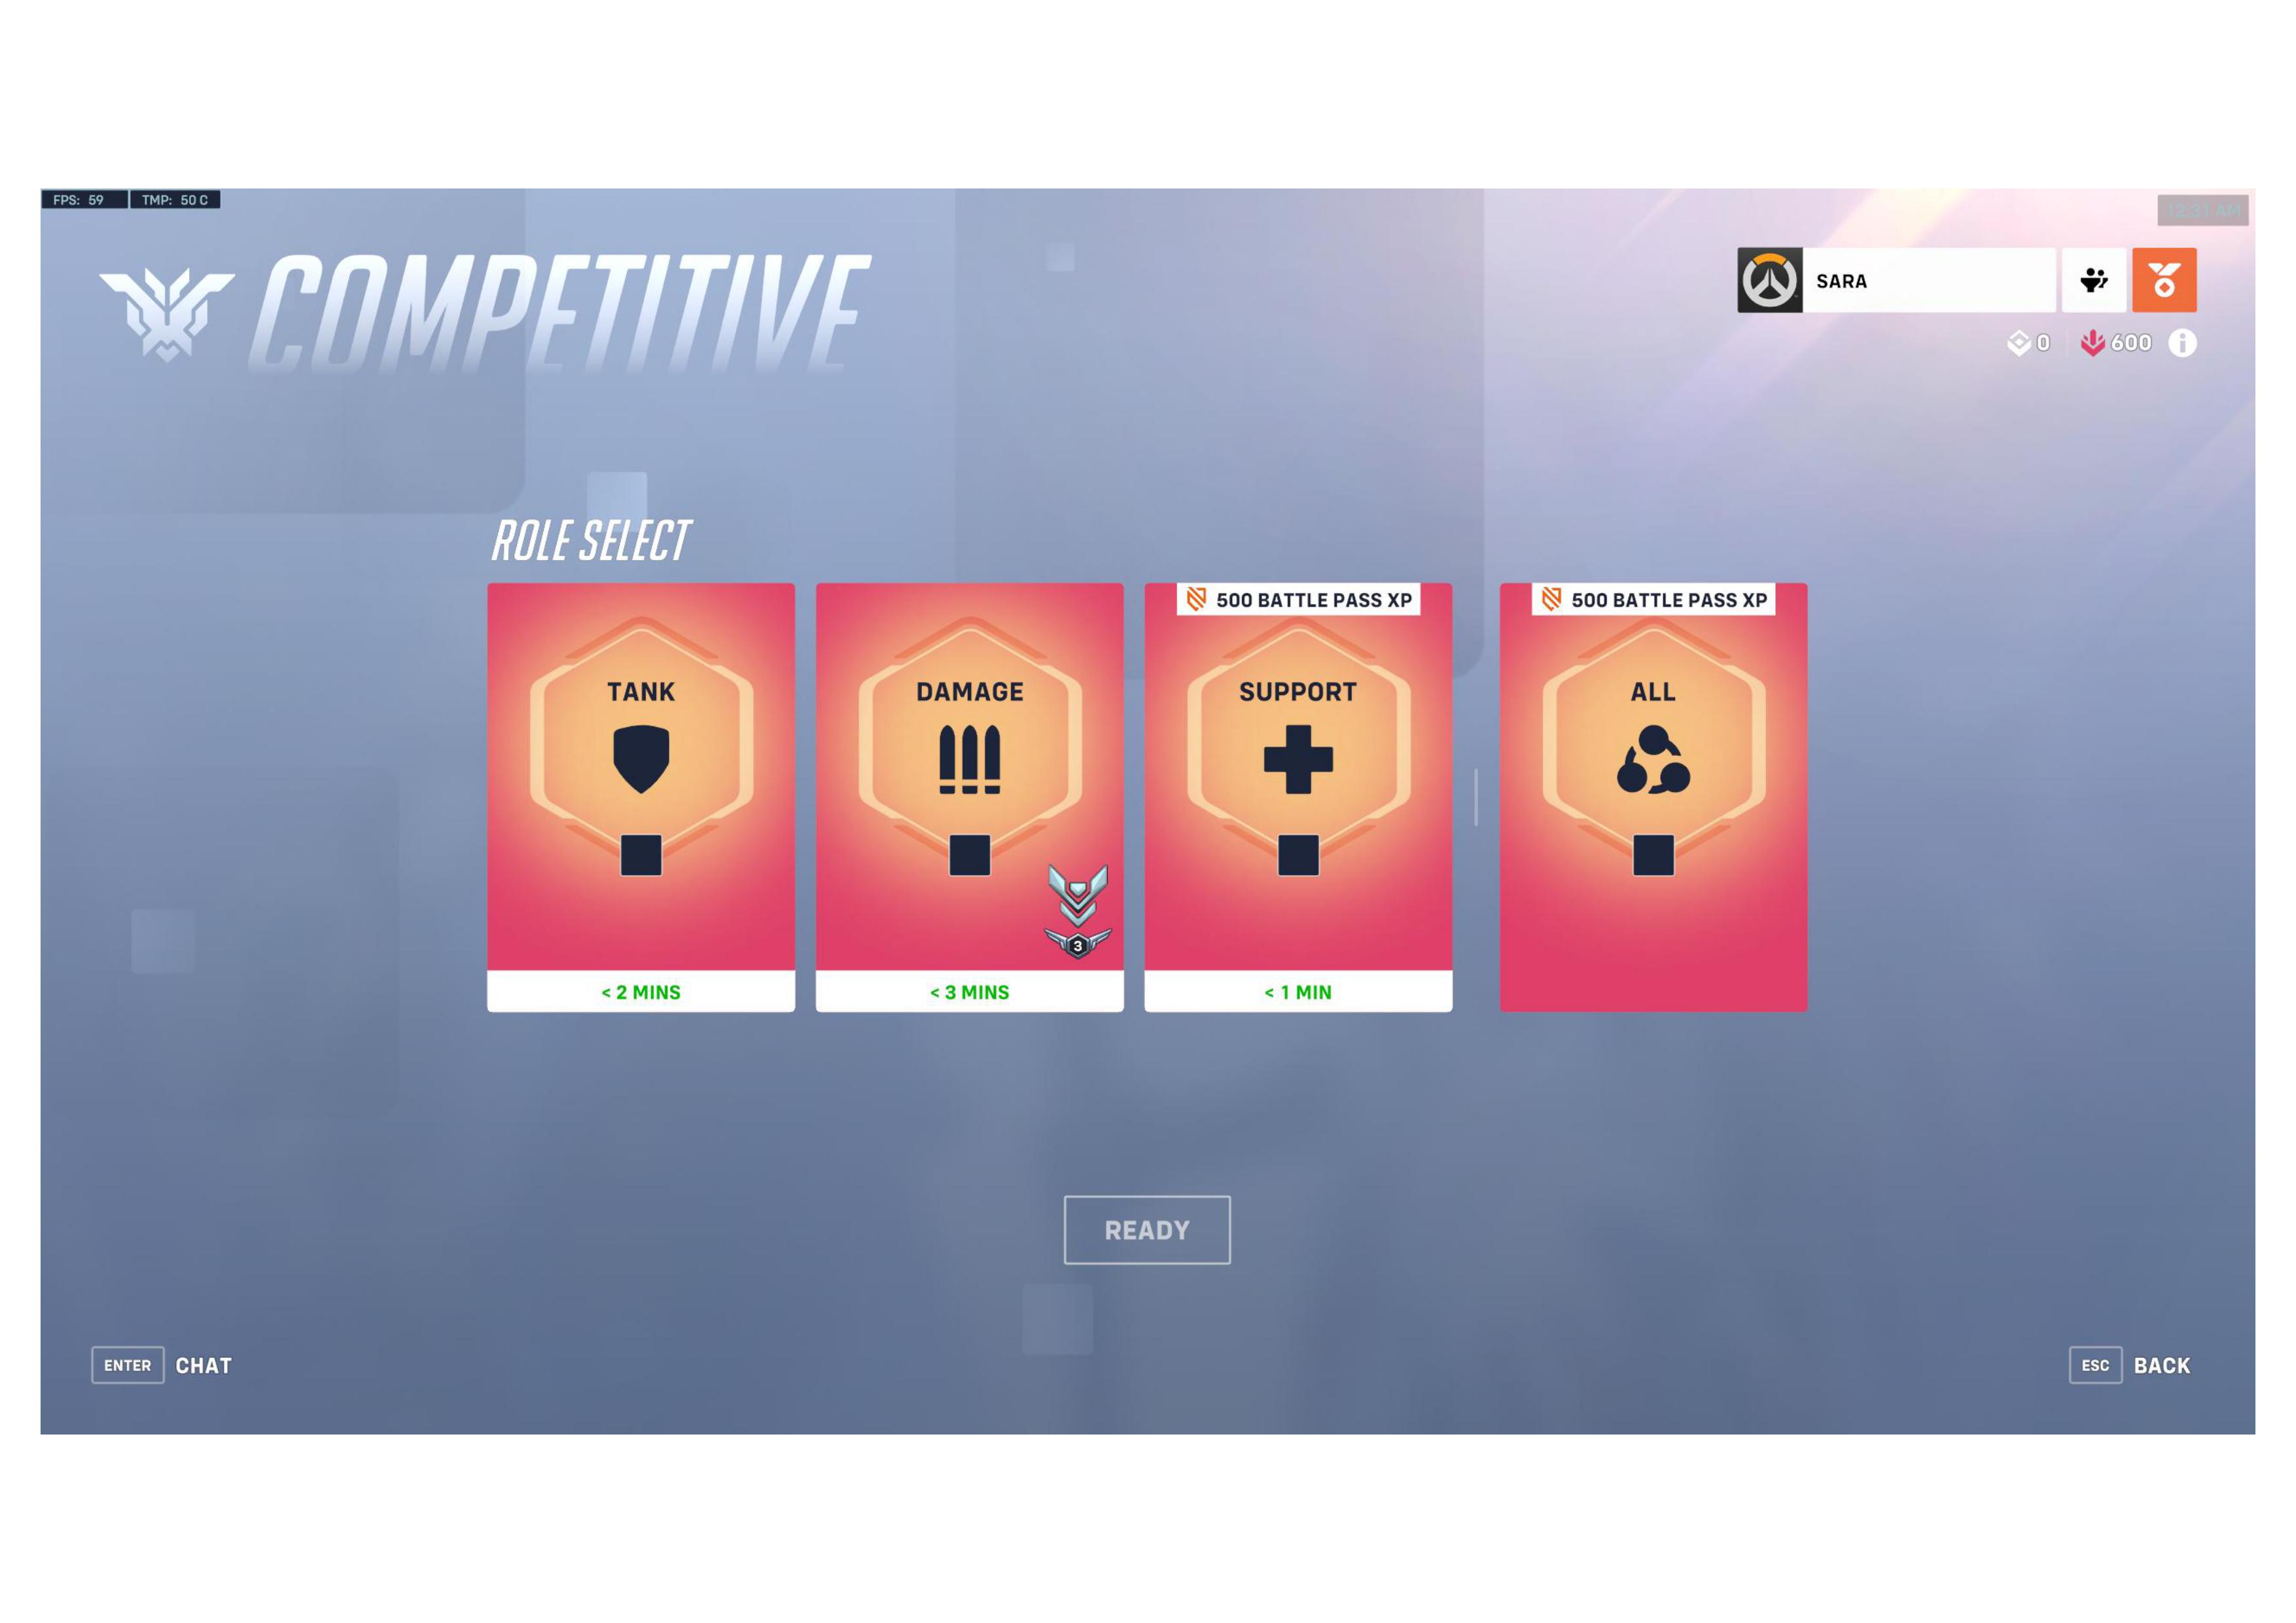 OVERWATCH 2| OW2 Account Plat 3 dps with 2 epic skins + 1000 Overwatch Credits - 200 Overwatch Coins |=PC/XBOX/PS-| ALL HEROS UNLOCKED 